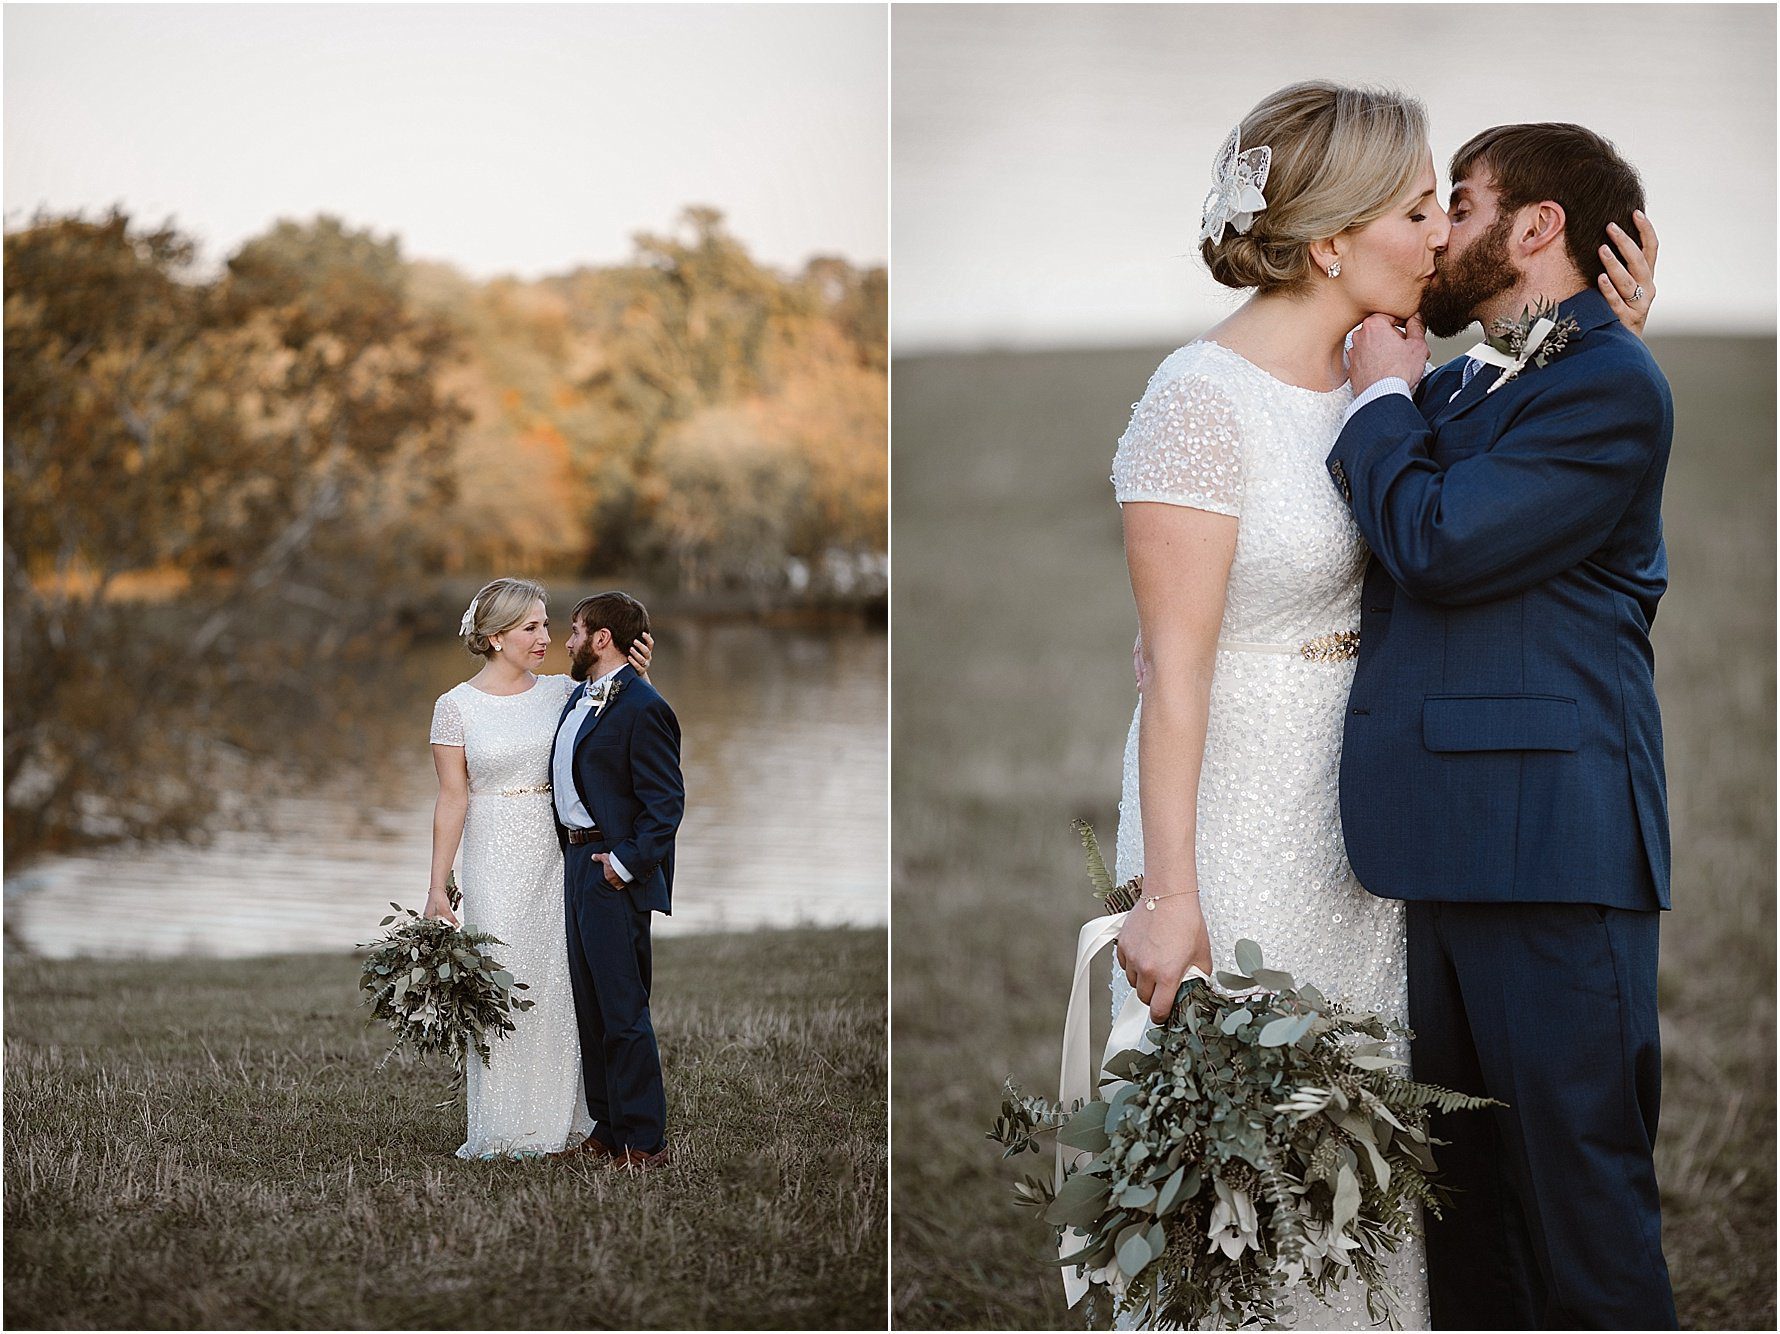 Lake Wedding Venues in Knoxville | Erin Morrison Photography www.erinmorrisonphotography.com